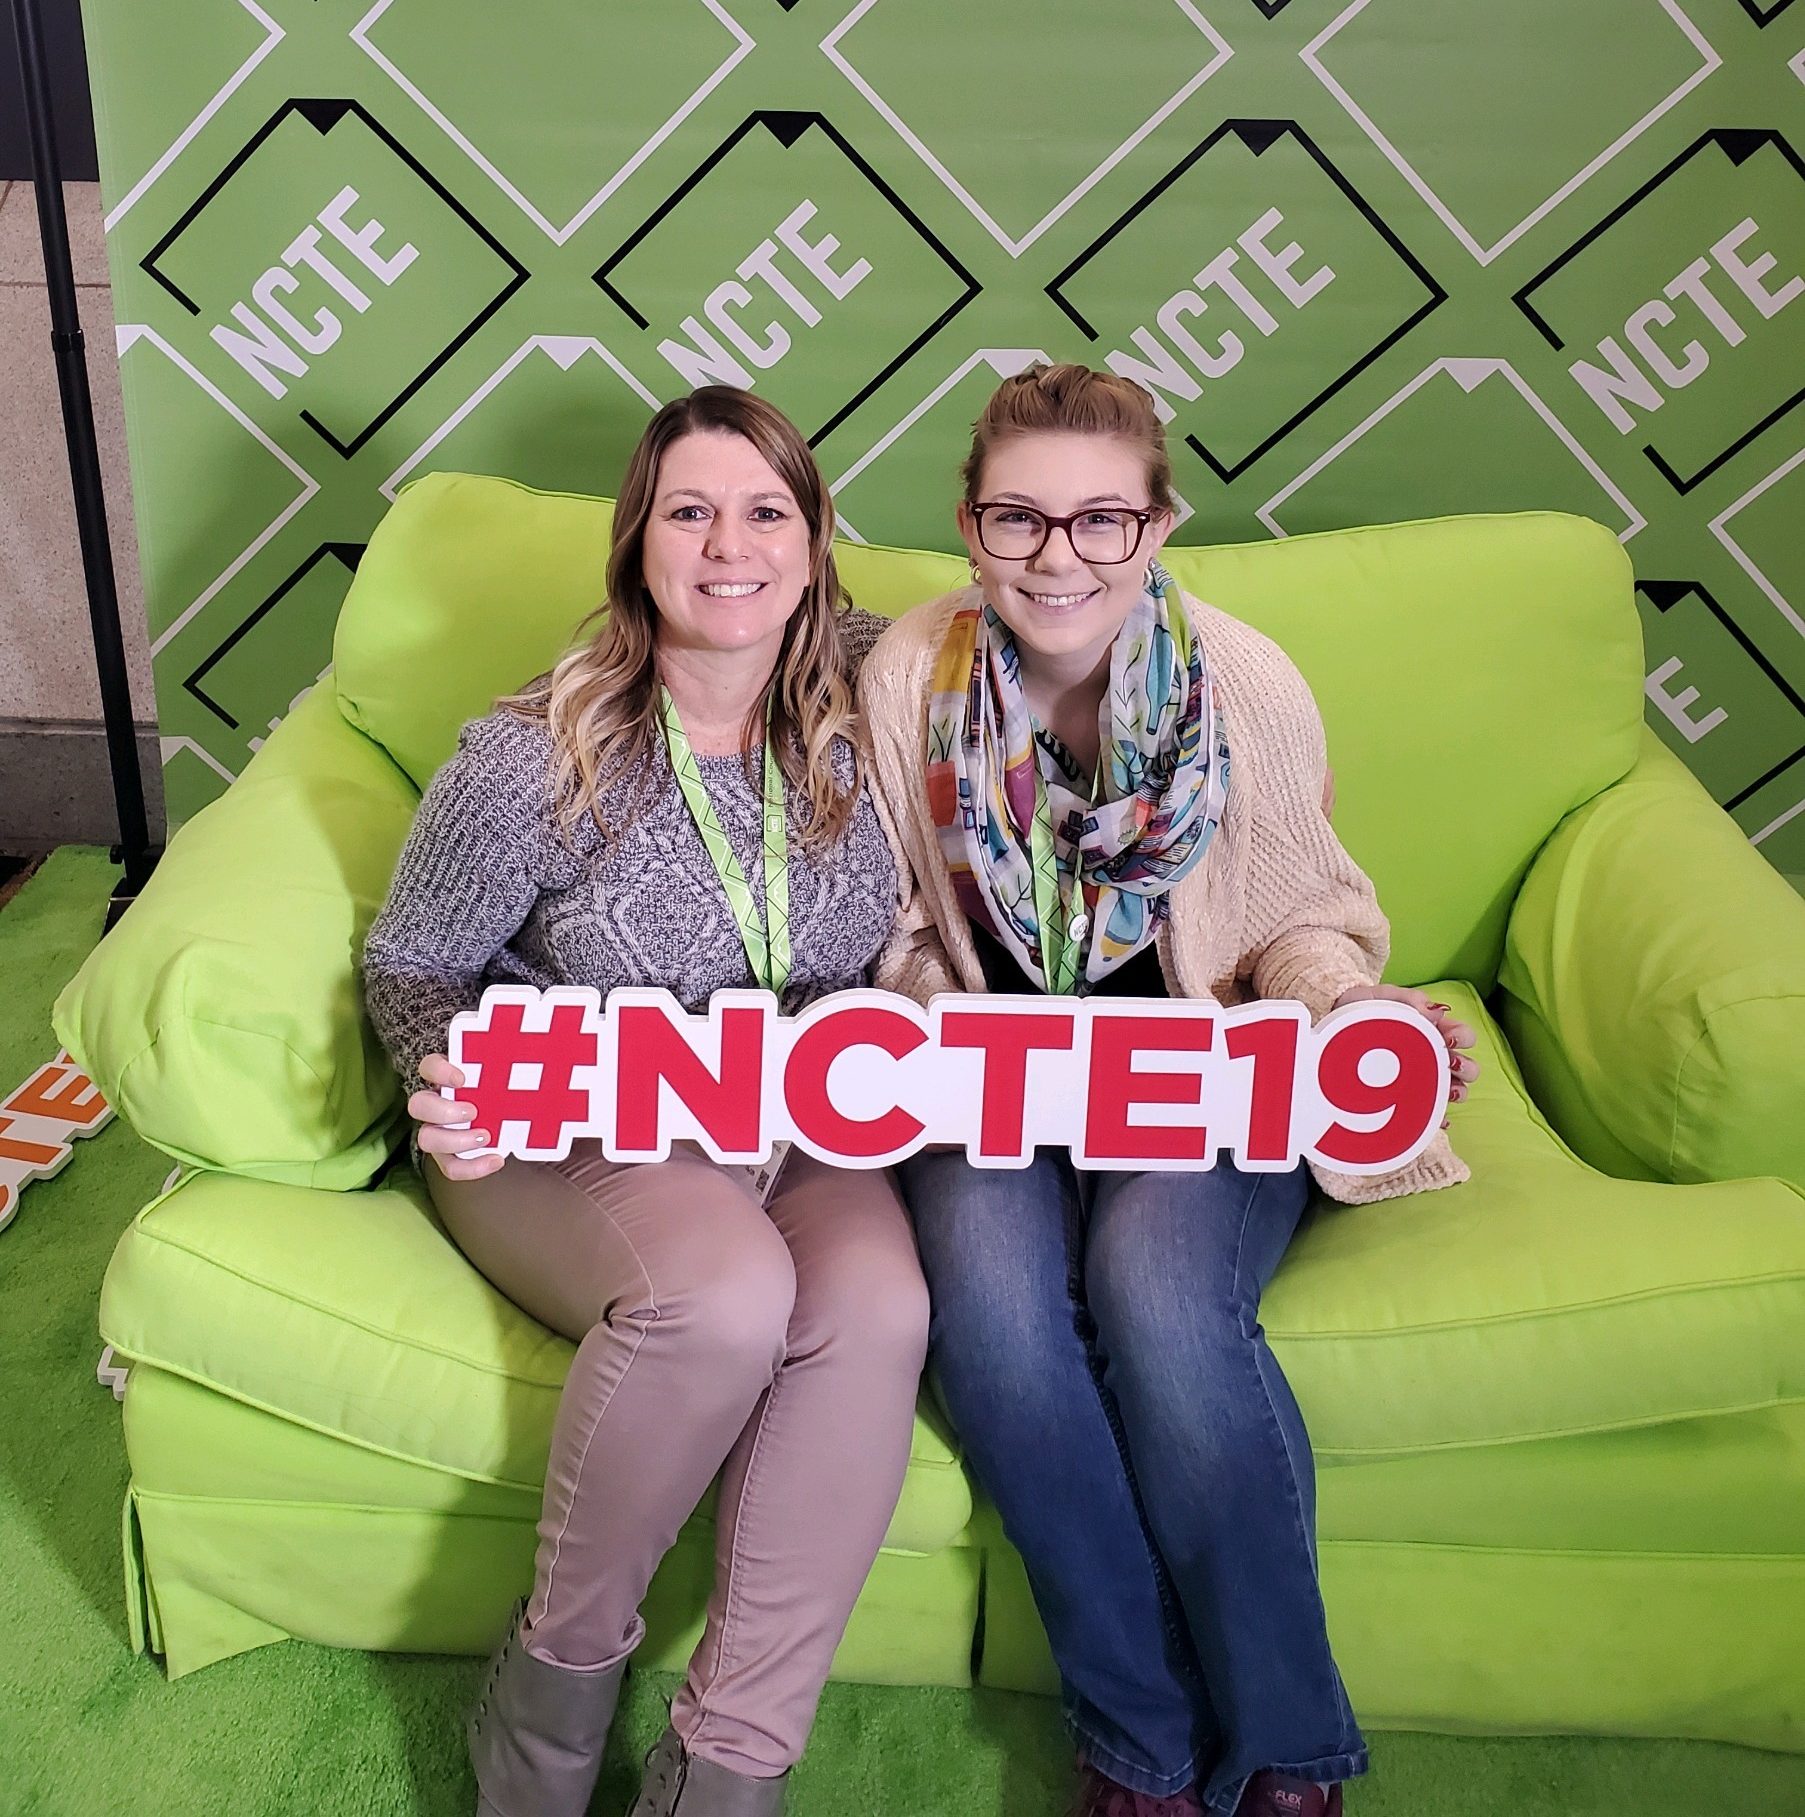 EWU students pose in the #NCTE19 photo booth